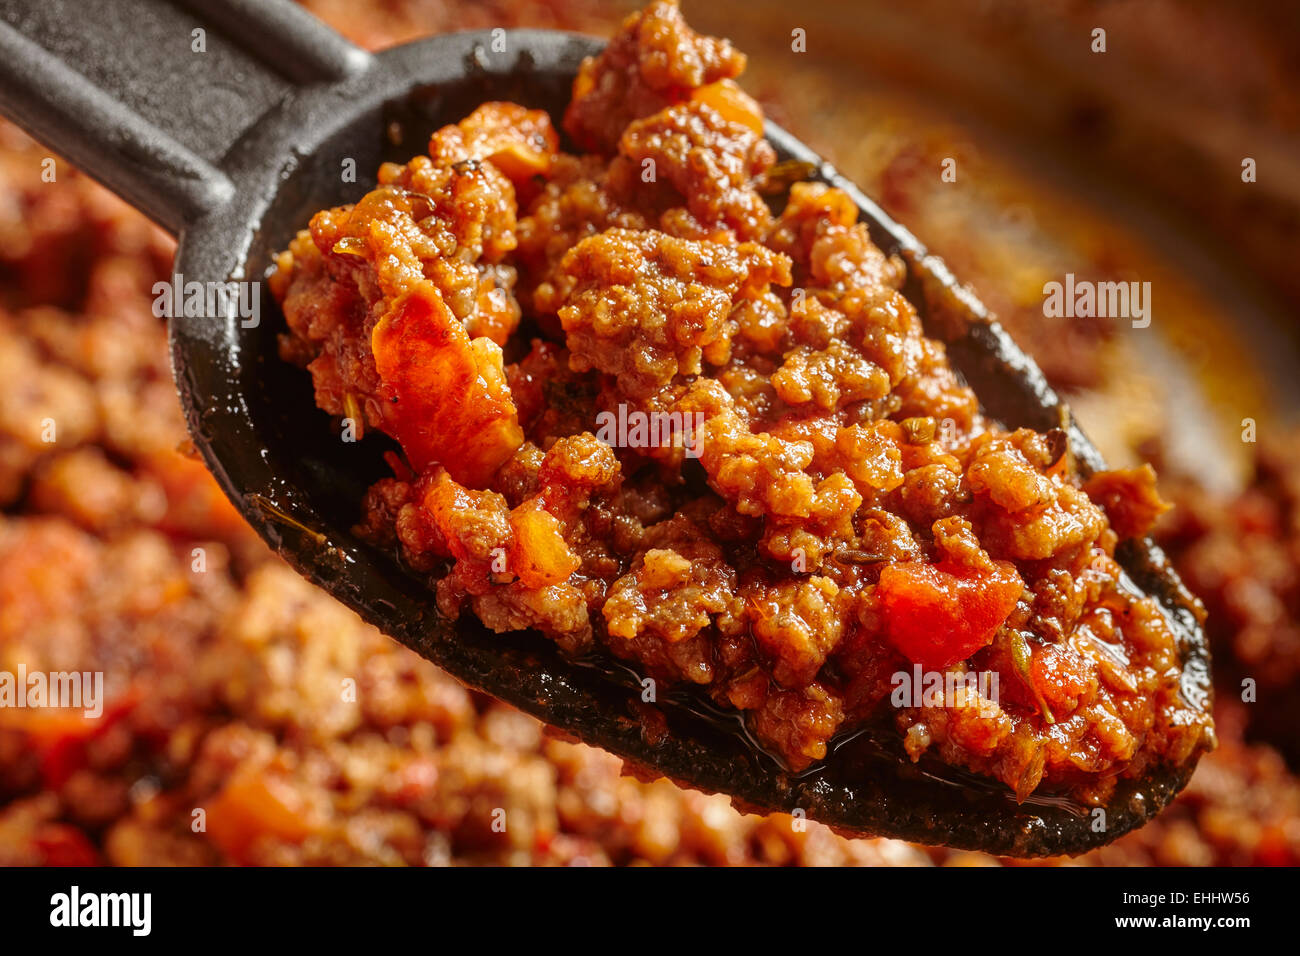 A Northern Italian style pasta sauce with ground (minced) beef and a bit of tomato. Traditional recipe from Piemonte. Stock Photo